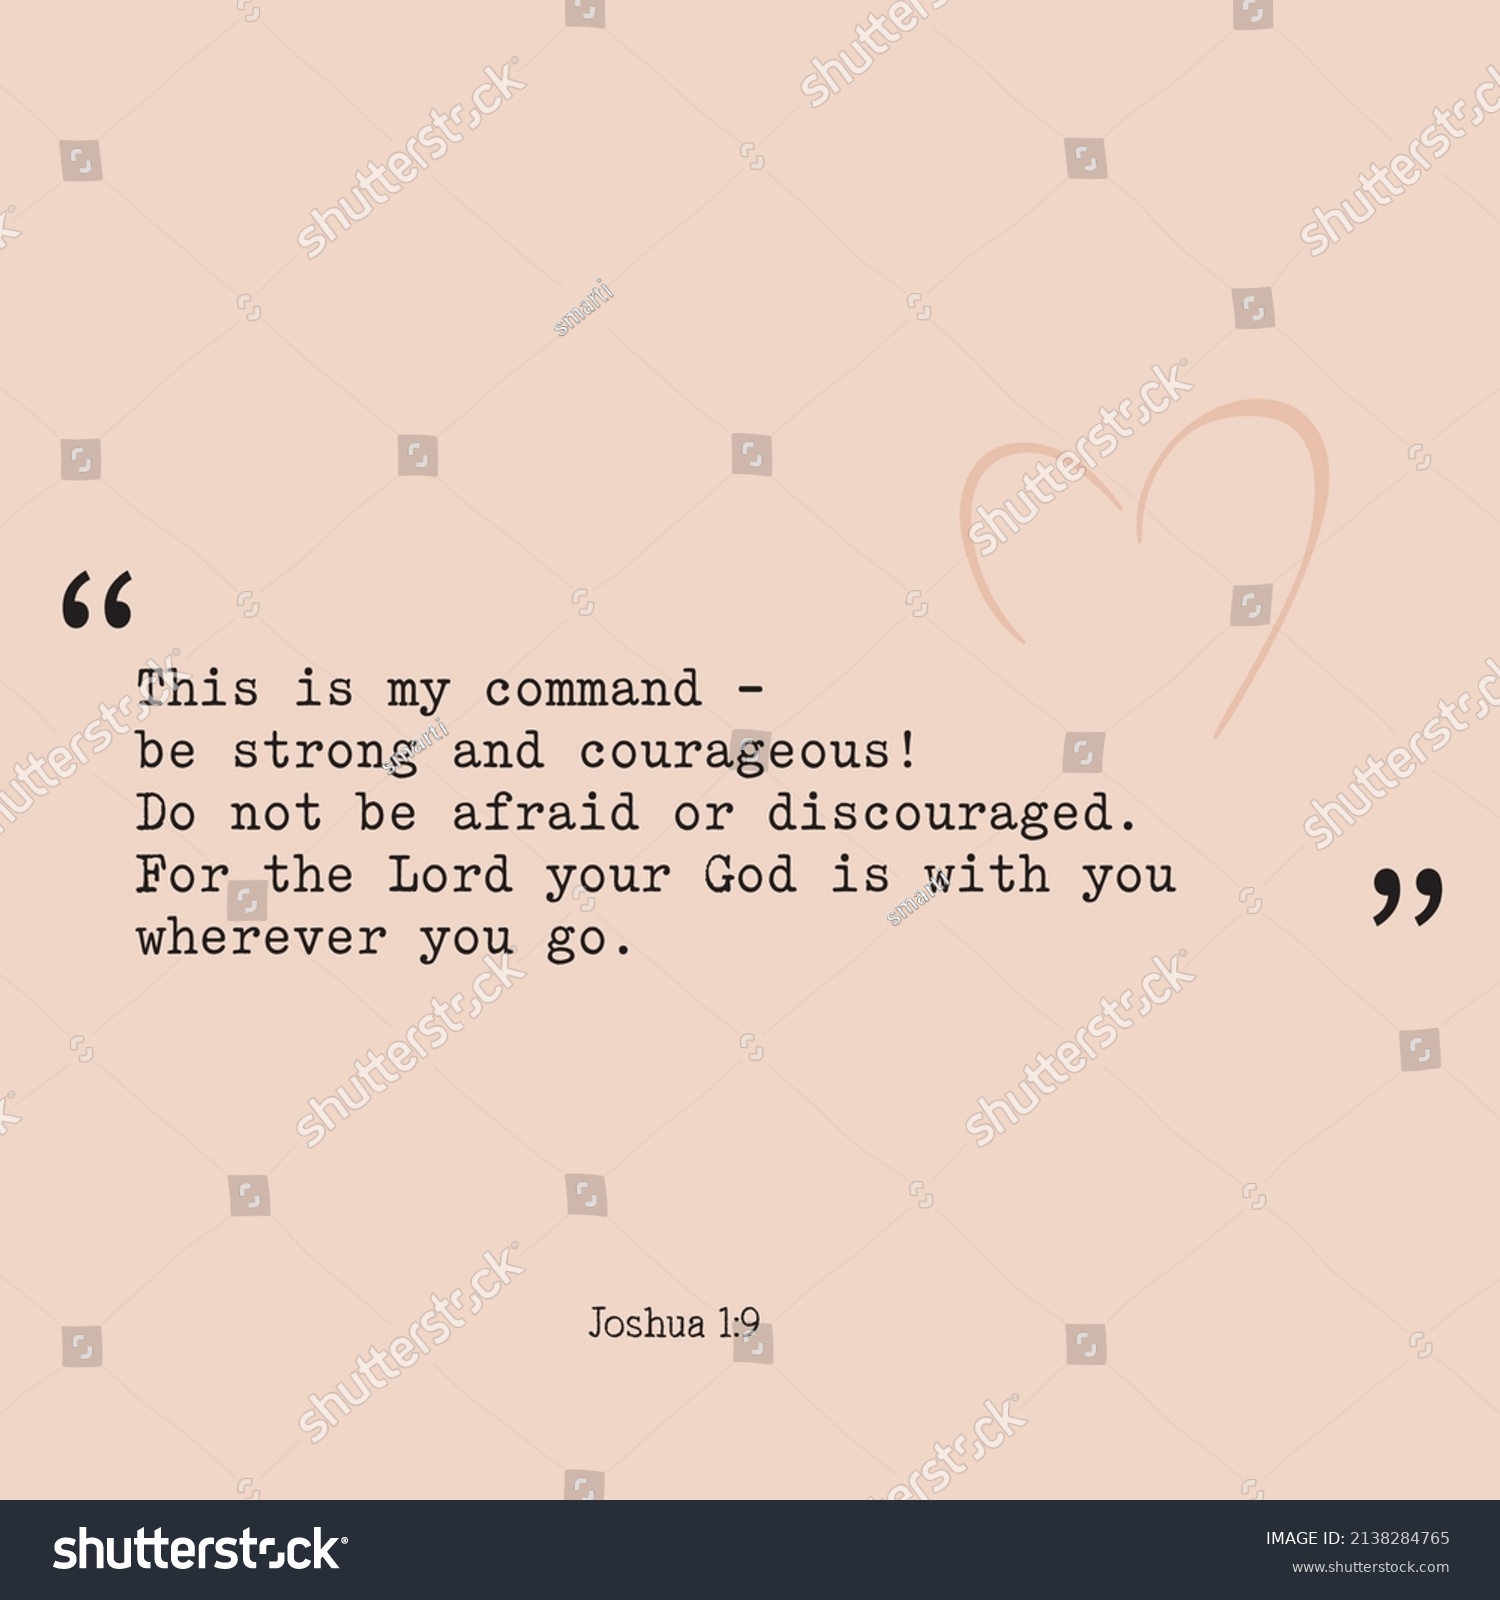 SVG of This is my command—be strong and courageous! Do not be afraid or discouraged. For the Lord your God is with you wherever you go svg